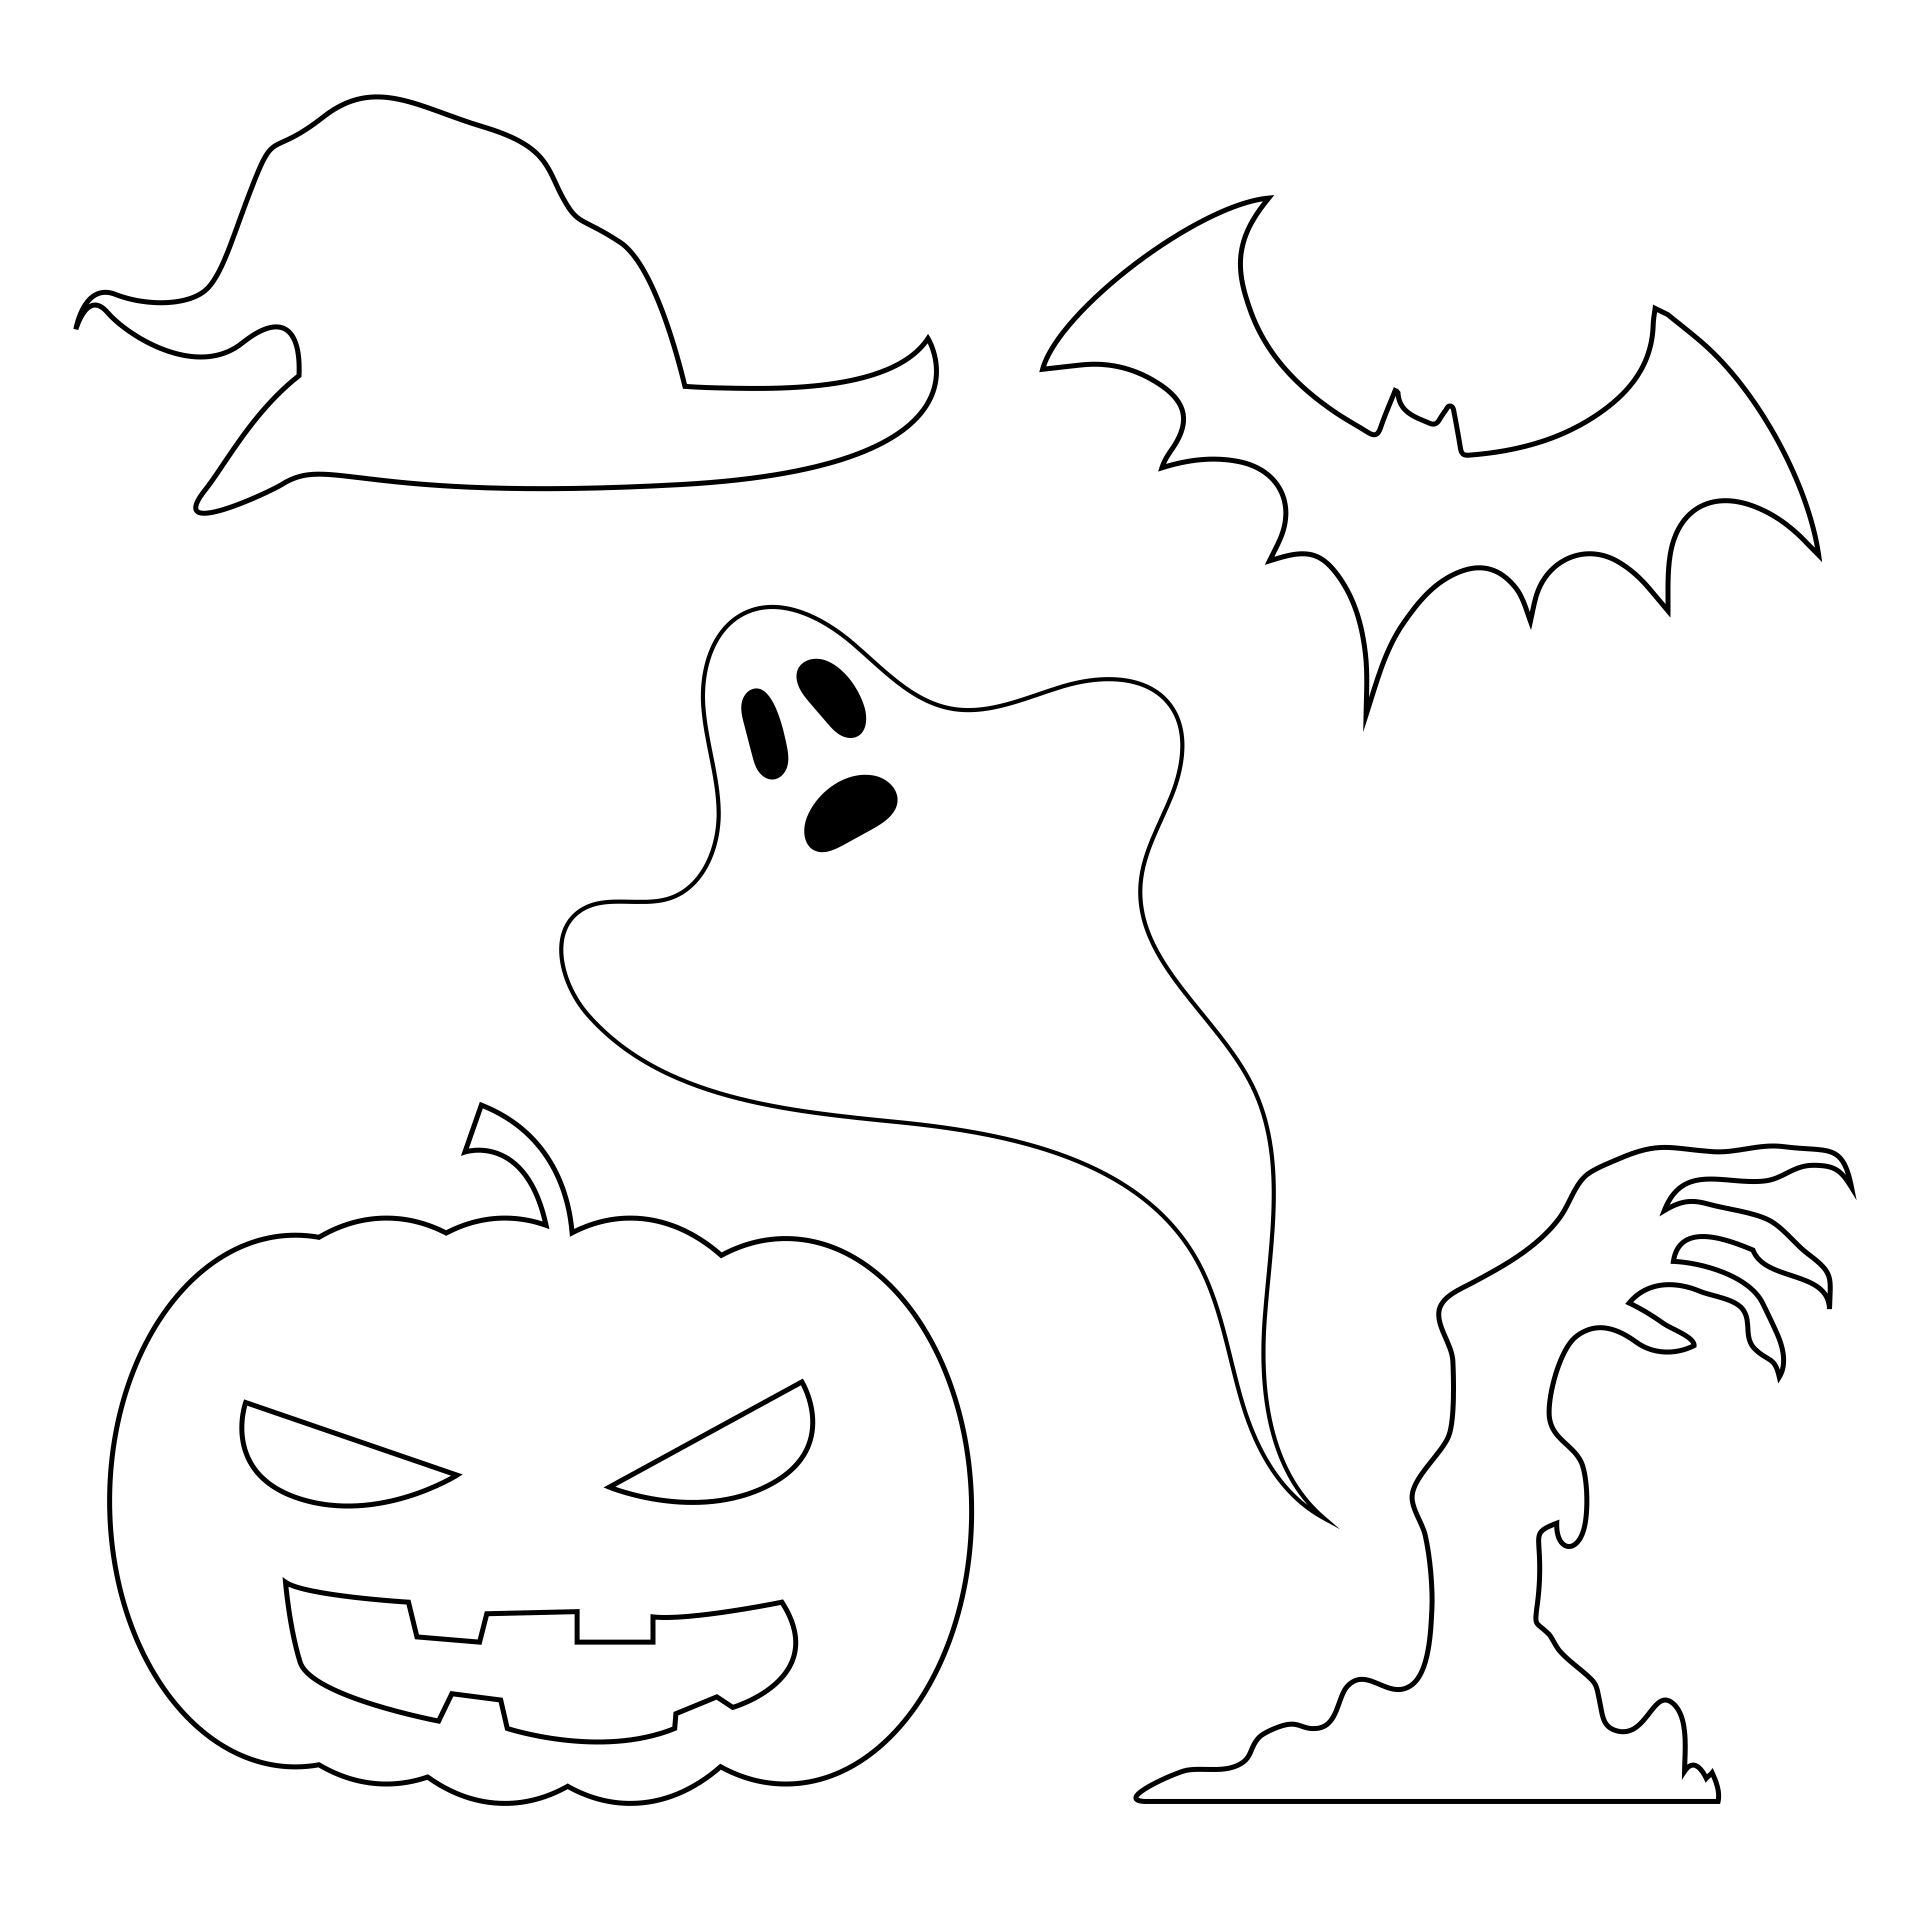 Printable Halloween Stencils For Painting - Printable Templates Free